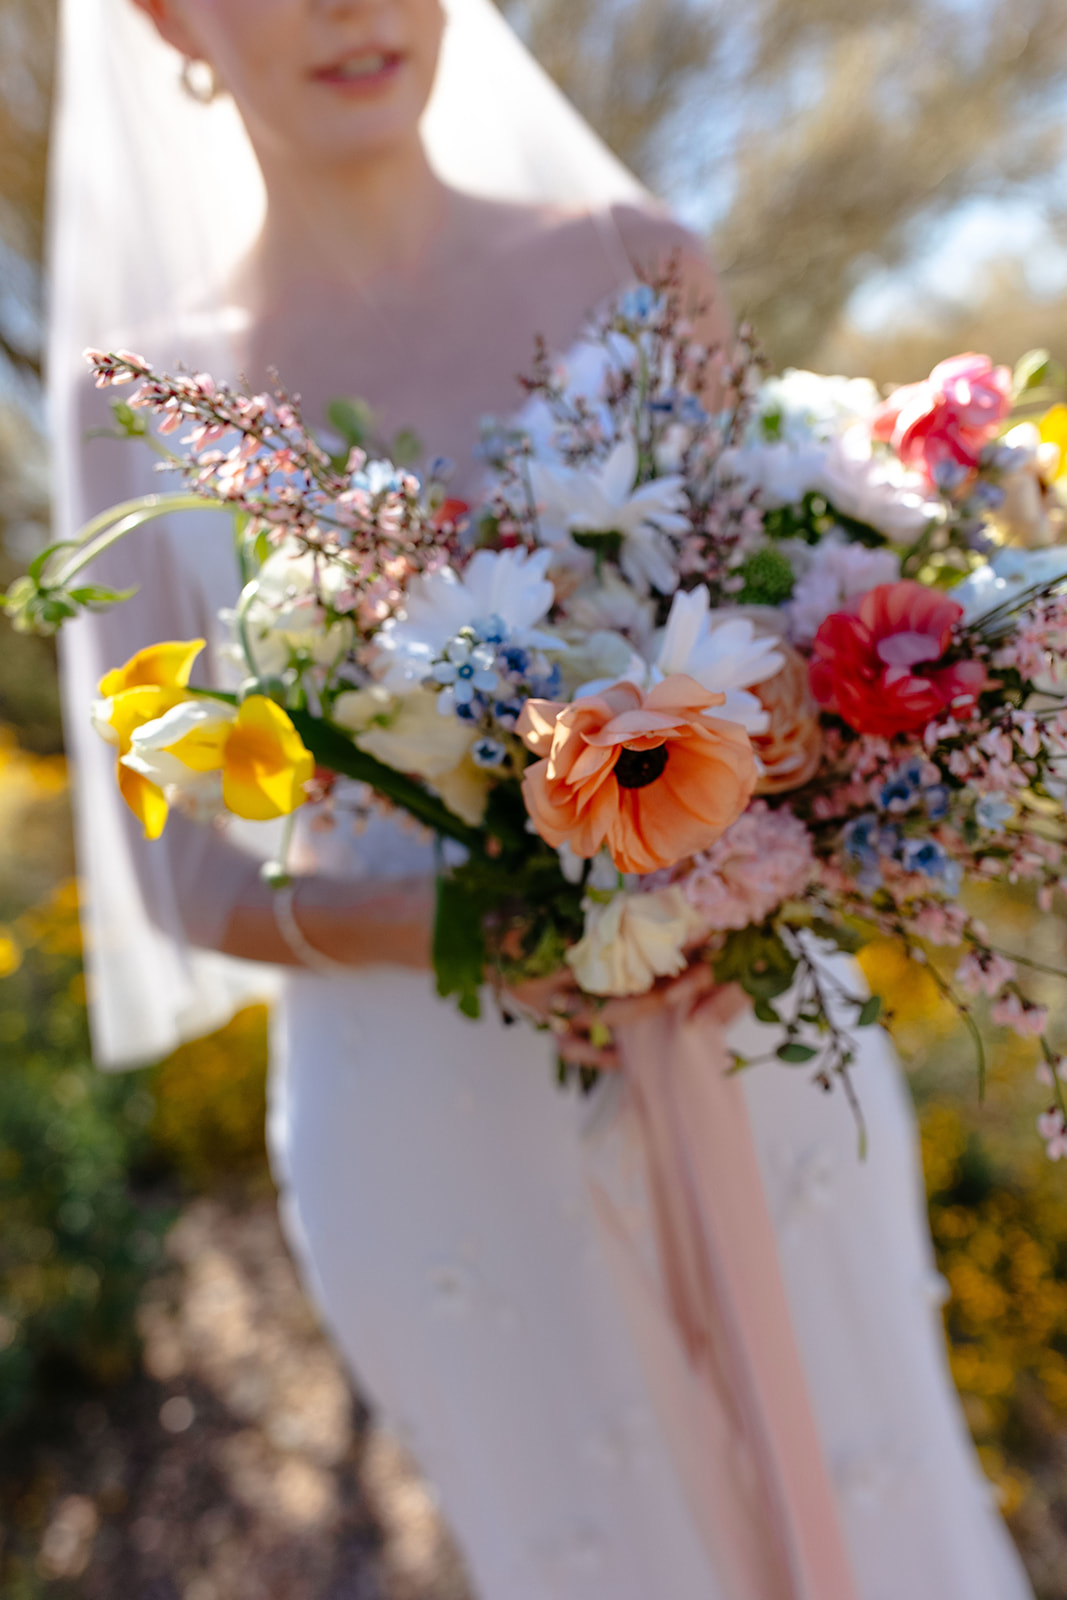 A bride holding a colorful bouquet of flowers, focusing on the bouquet with the bride softly blurred in the background.